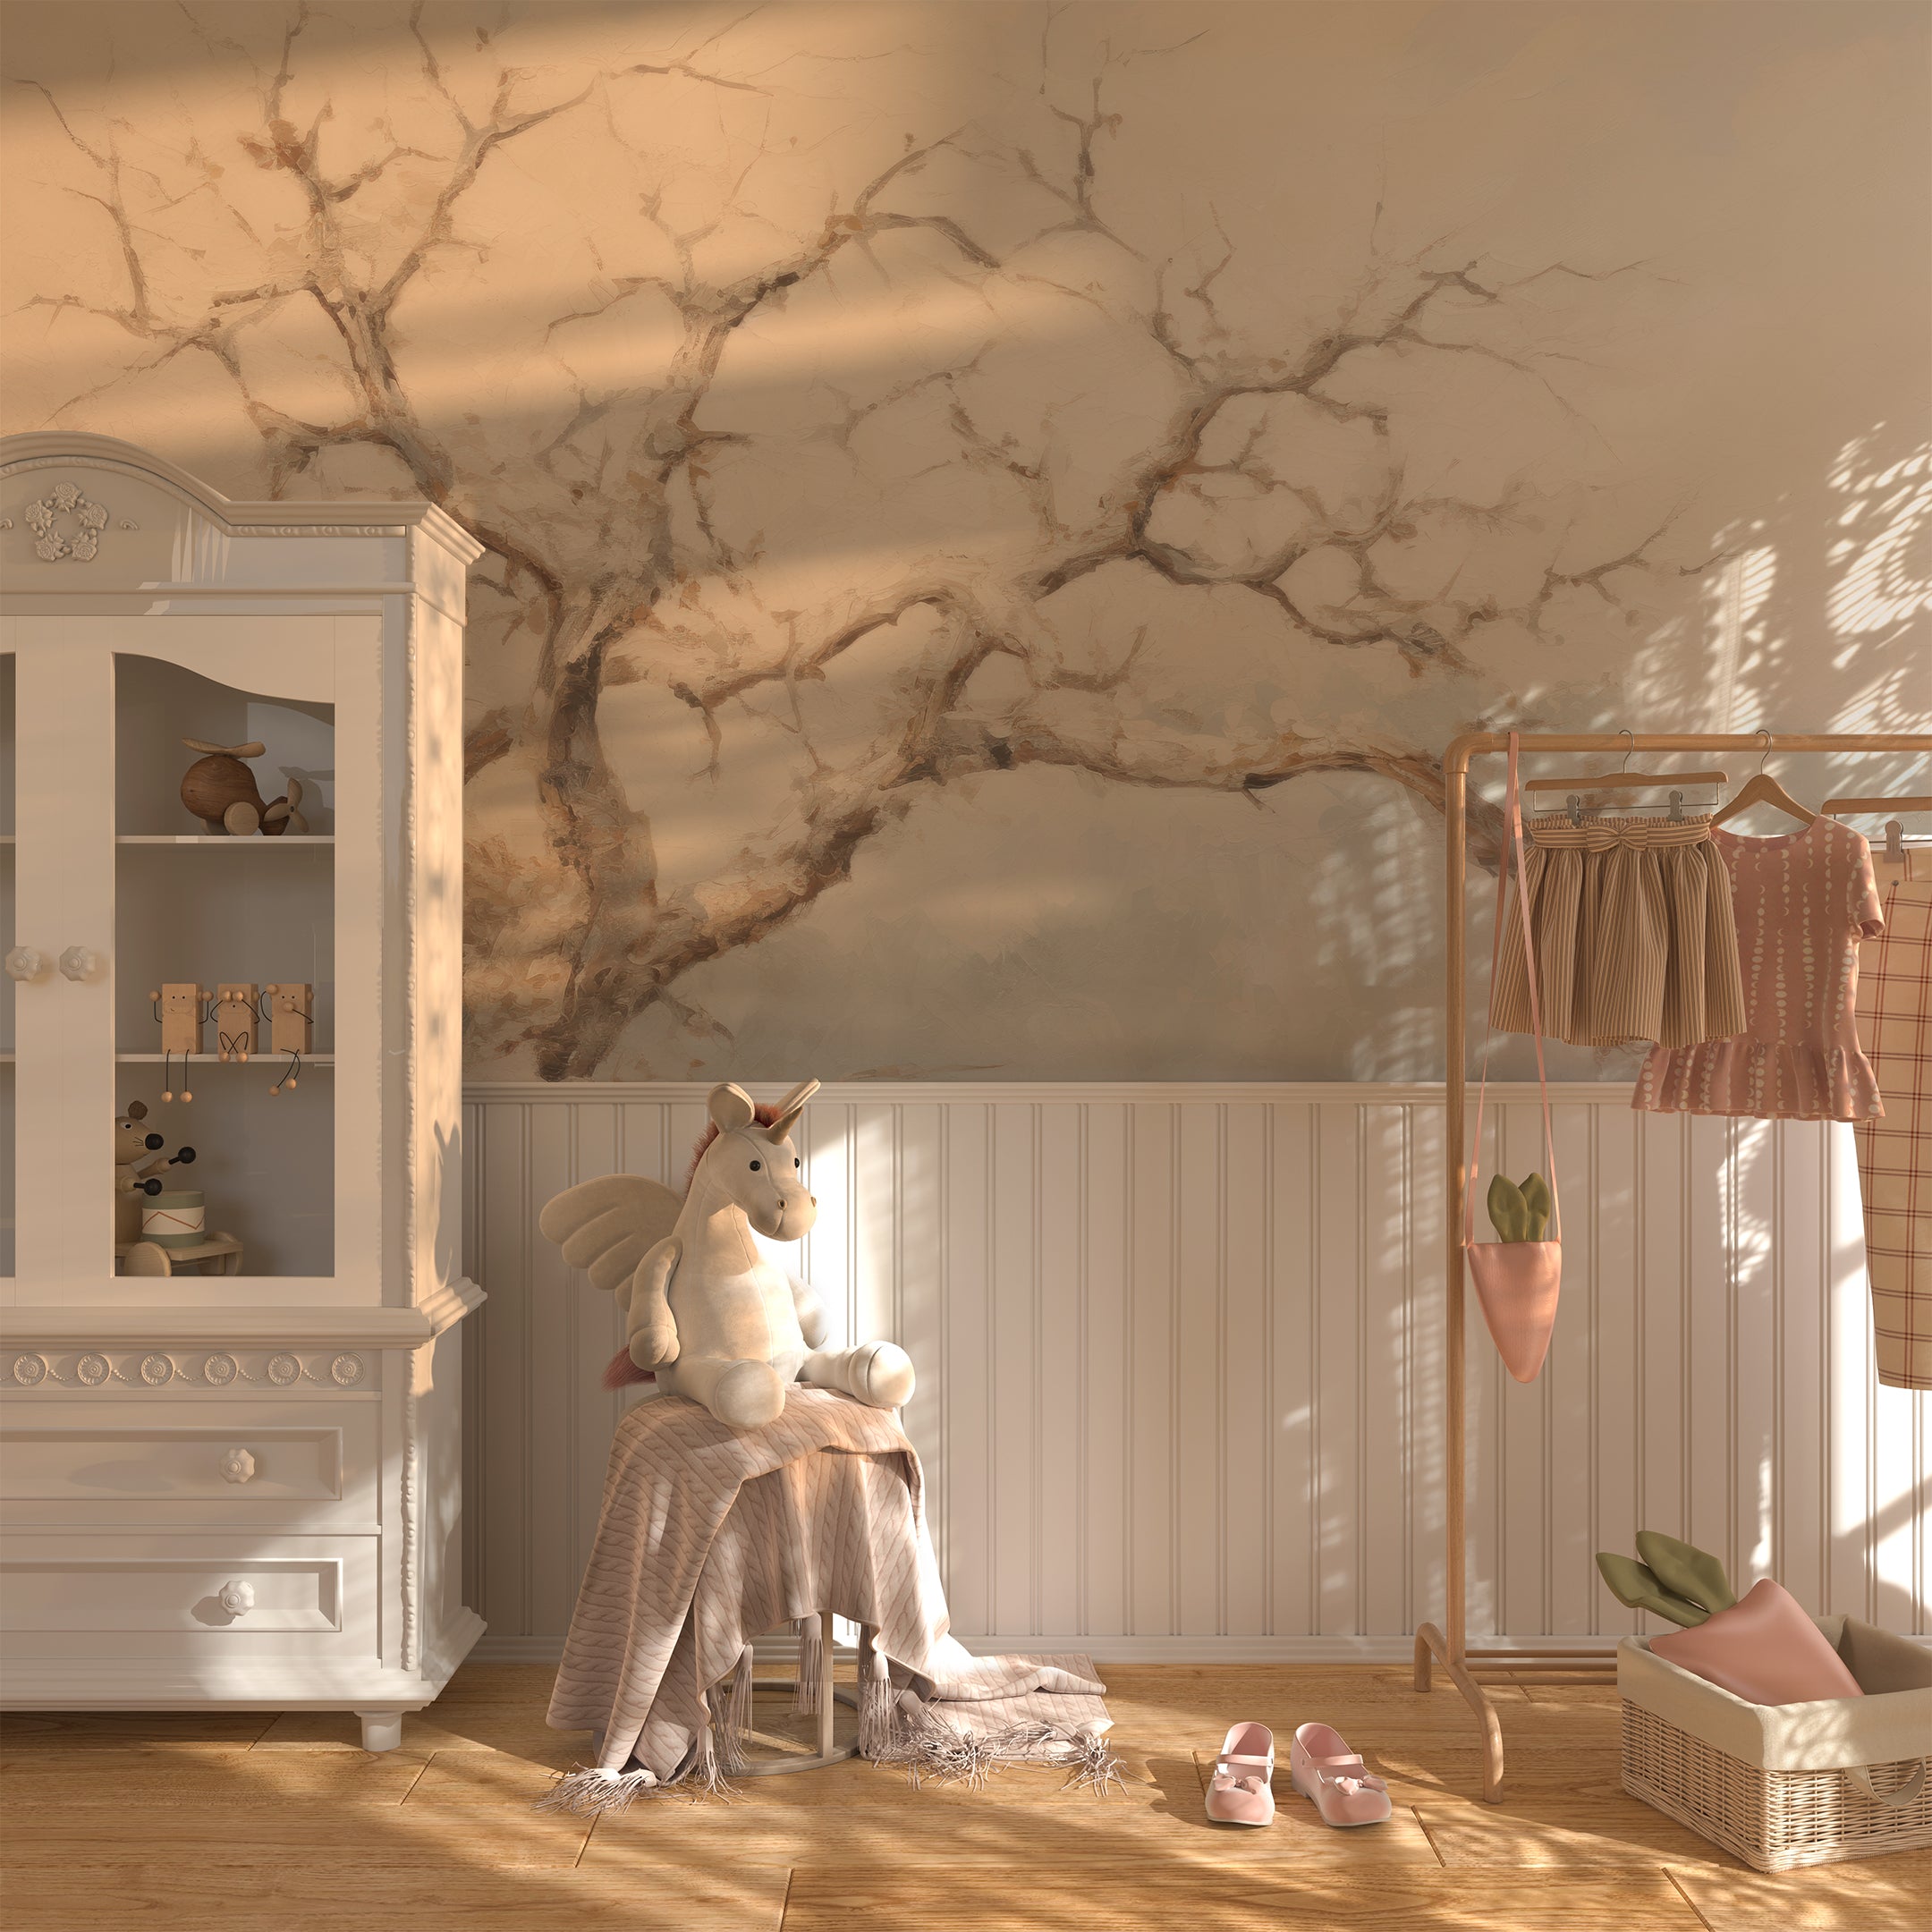 Winter Tree Mural installed in a cozy nursery with a white dresser, unicorn plush toy, and hanging clothes, bathed in soft, warm light.